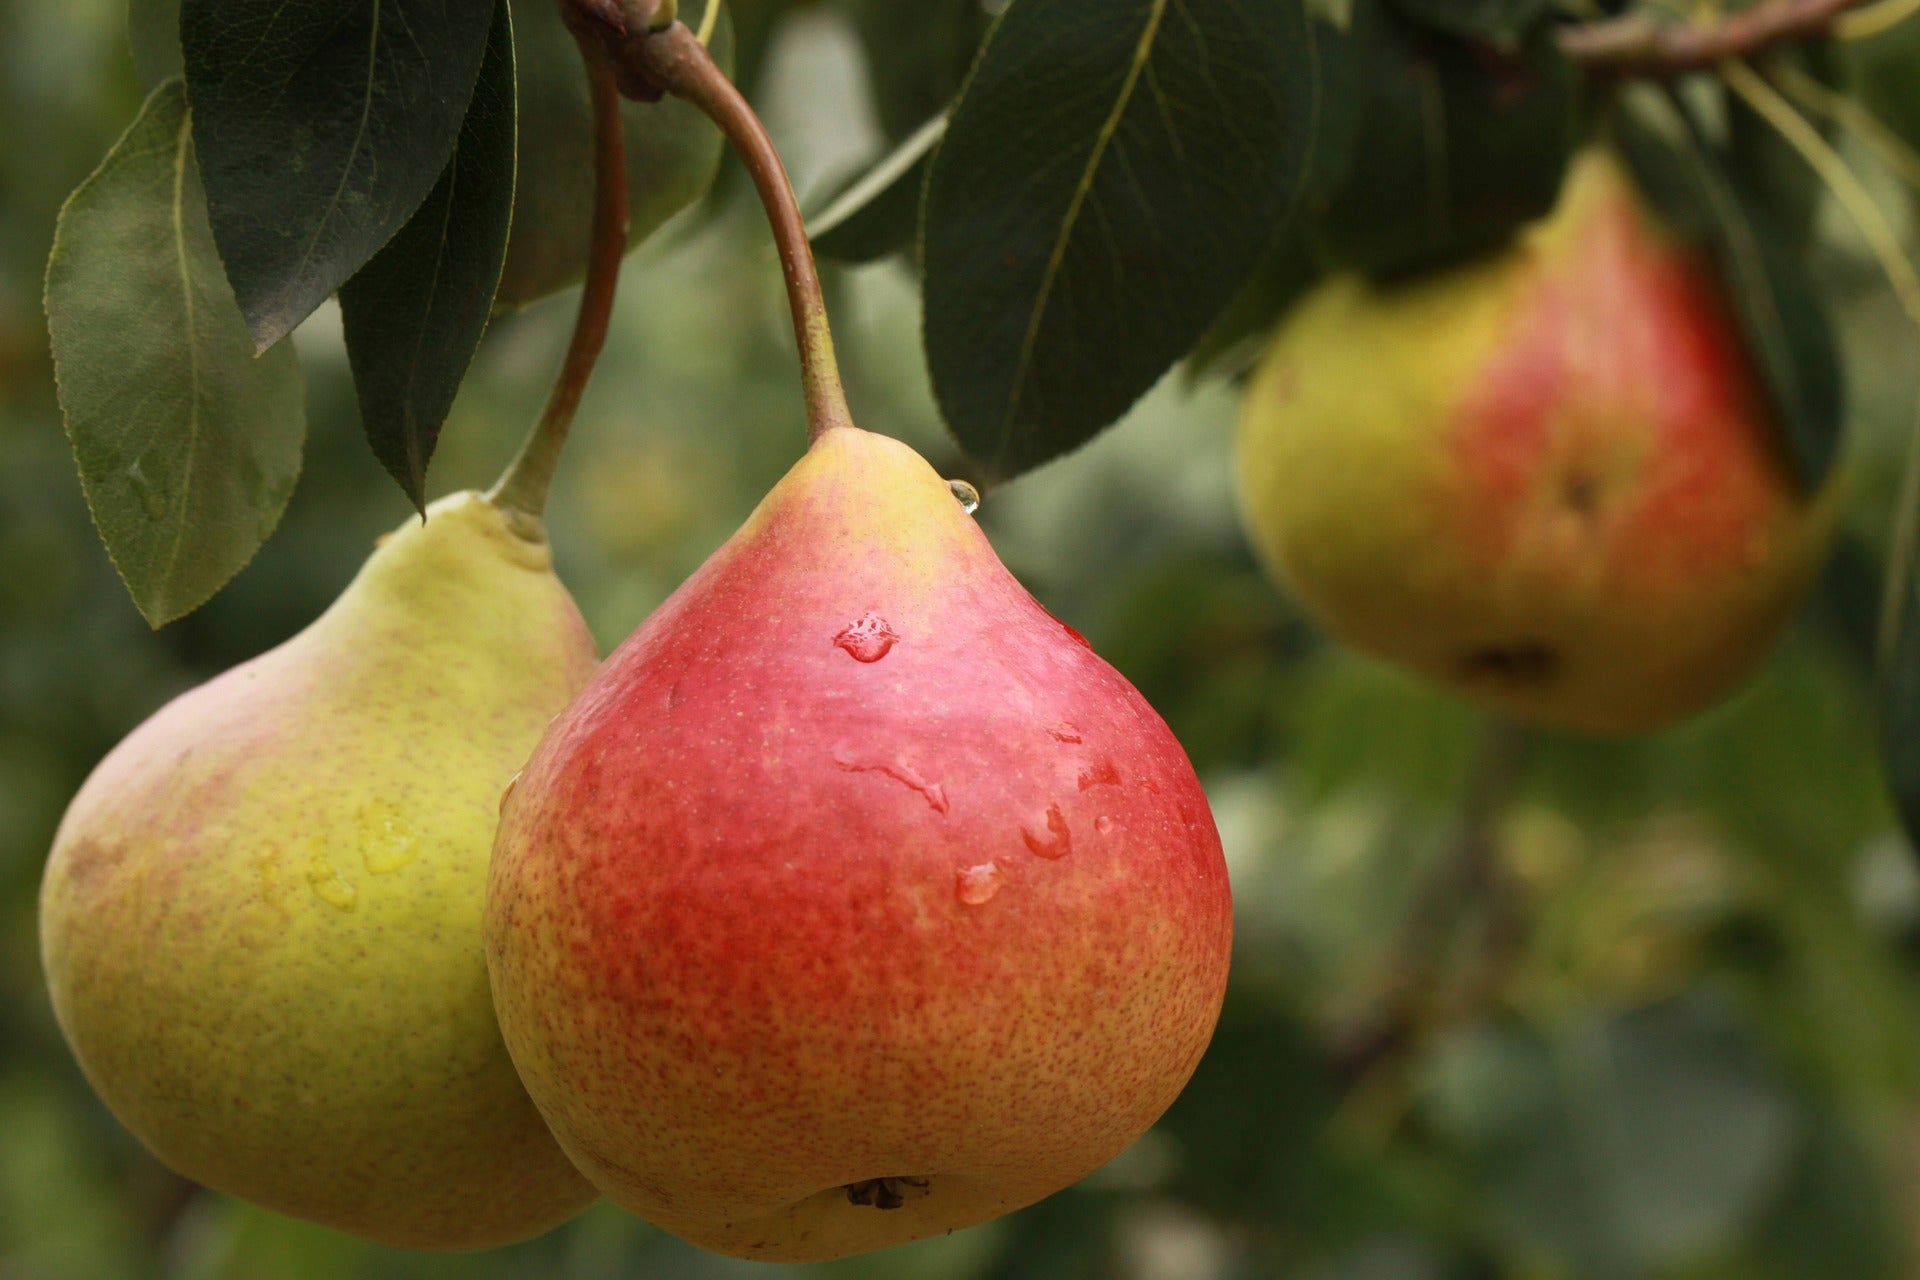 Dwarf Comice Pear Tree - The soft and sweet Christmas pear delicacy. ( –  Online Orchards